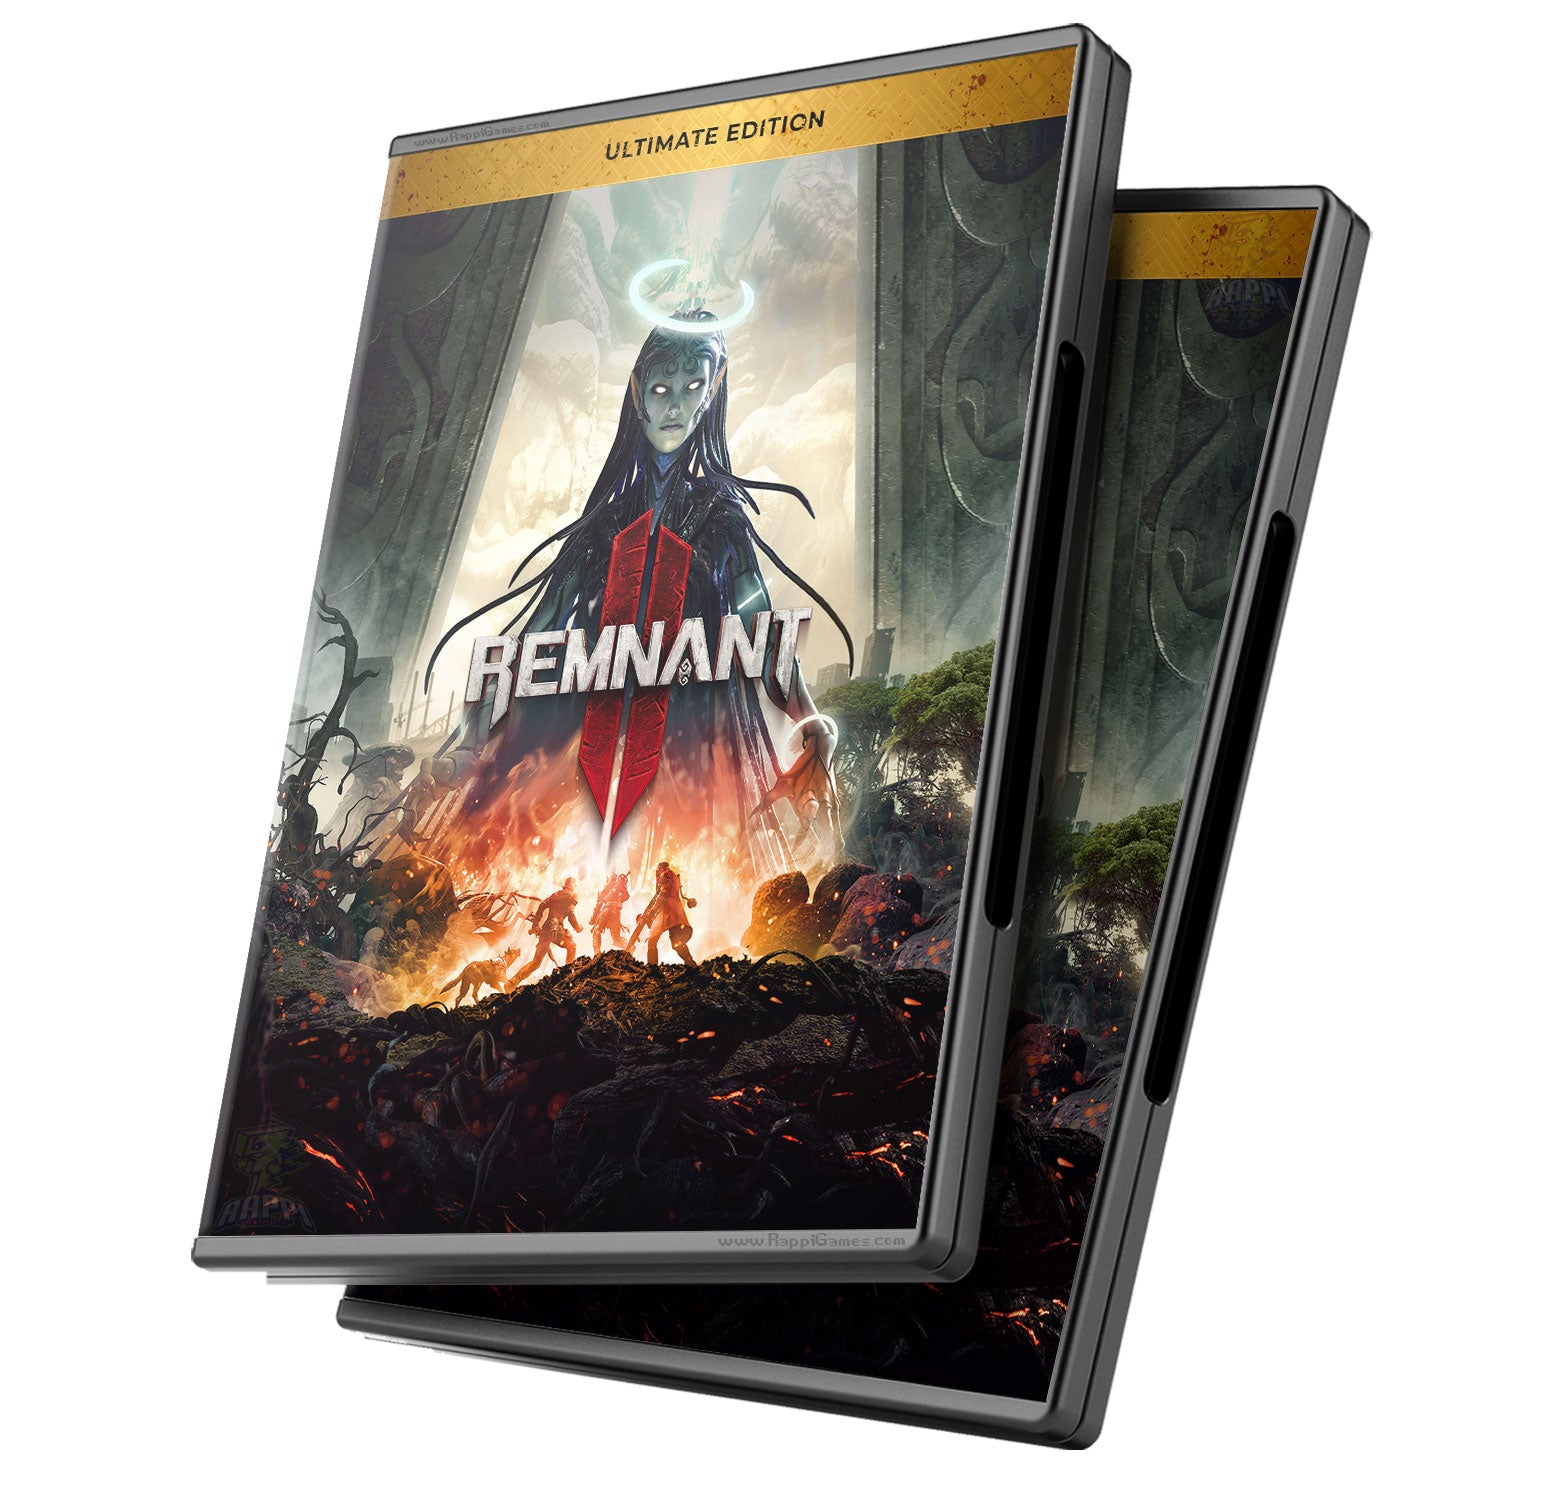 Remnant II Ultimate Edition - Pc